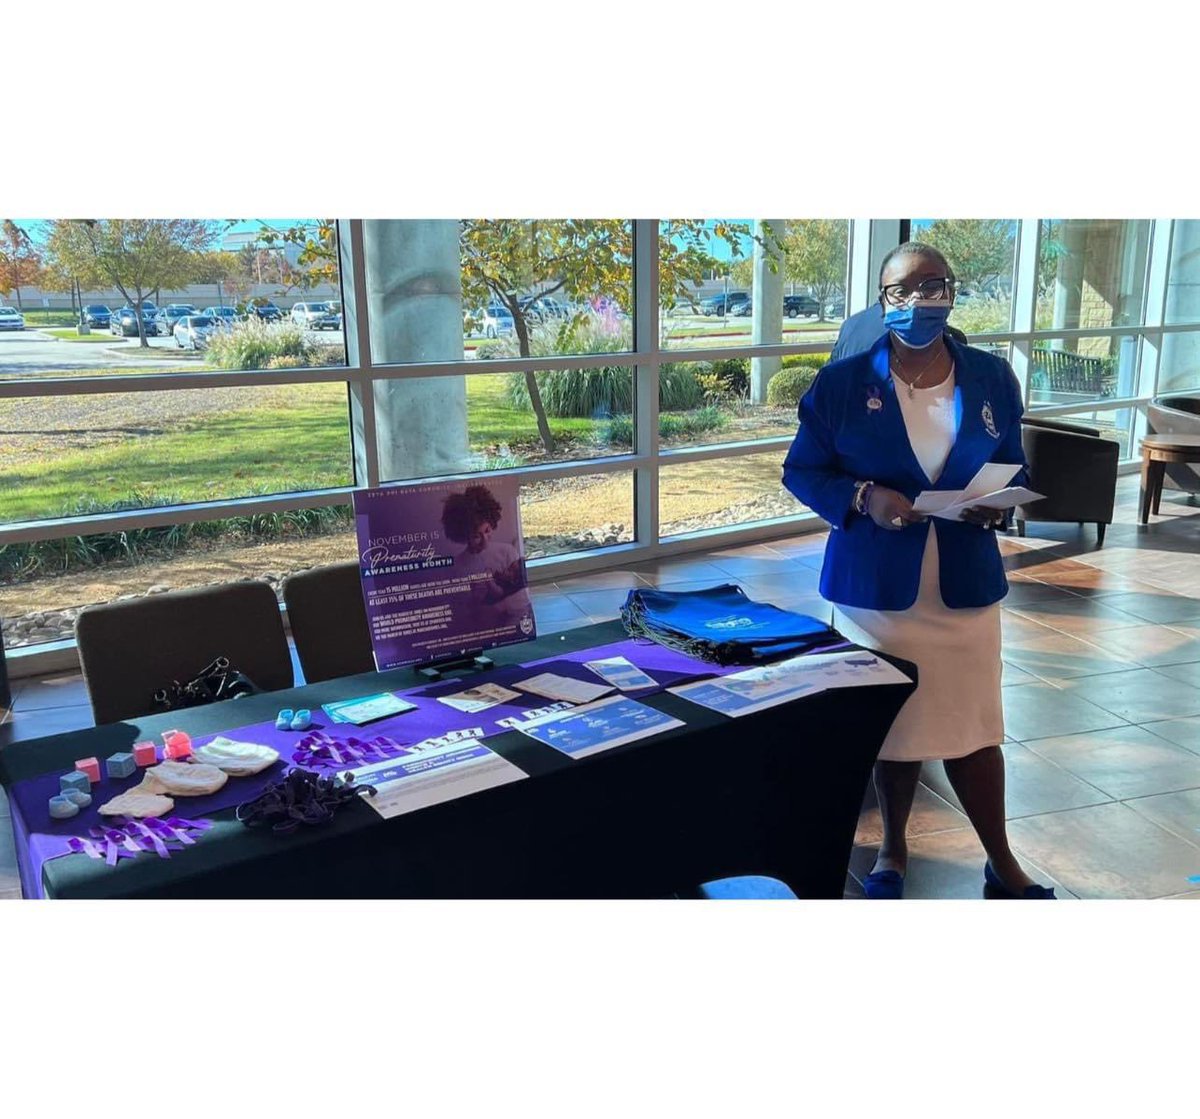 Special thank you to Dr. Terren Dames and North Dallas Community Bible Fellowship for allowing the Kappa Zeta Chapter to worship with you this morning and share information around Prematurity Awareness.  #ZPhiB #MarchOfDimes #ZPAP2021 #GreaterDallasZetas #SNCFD #ProjectHER